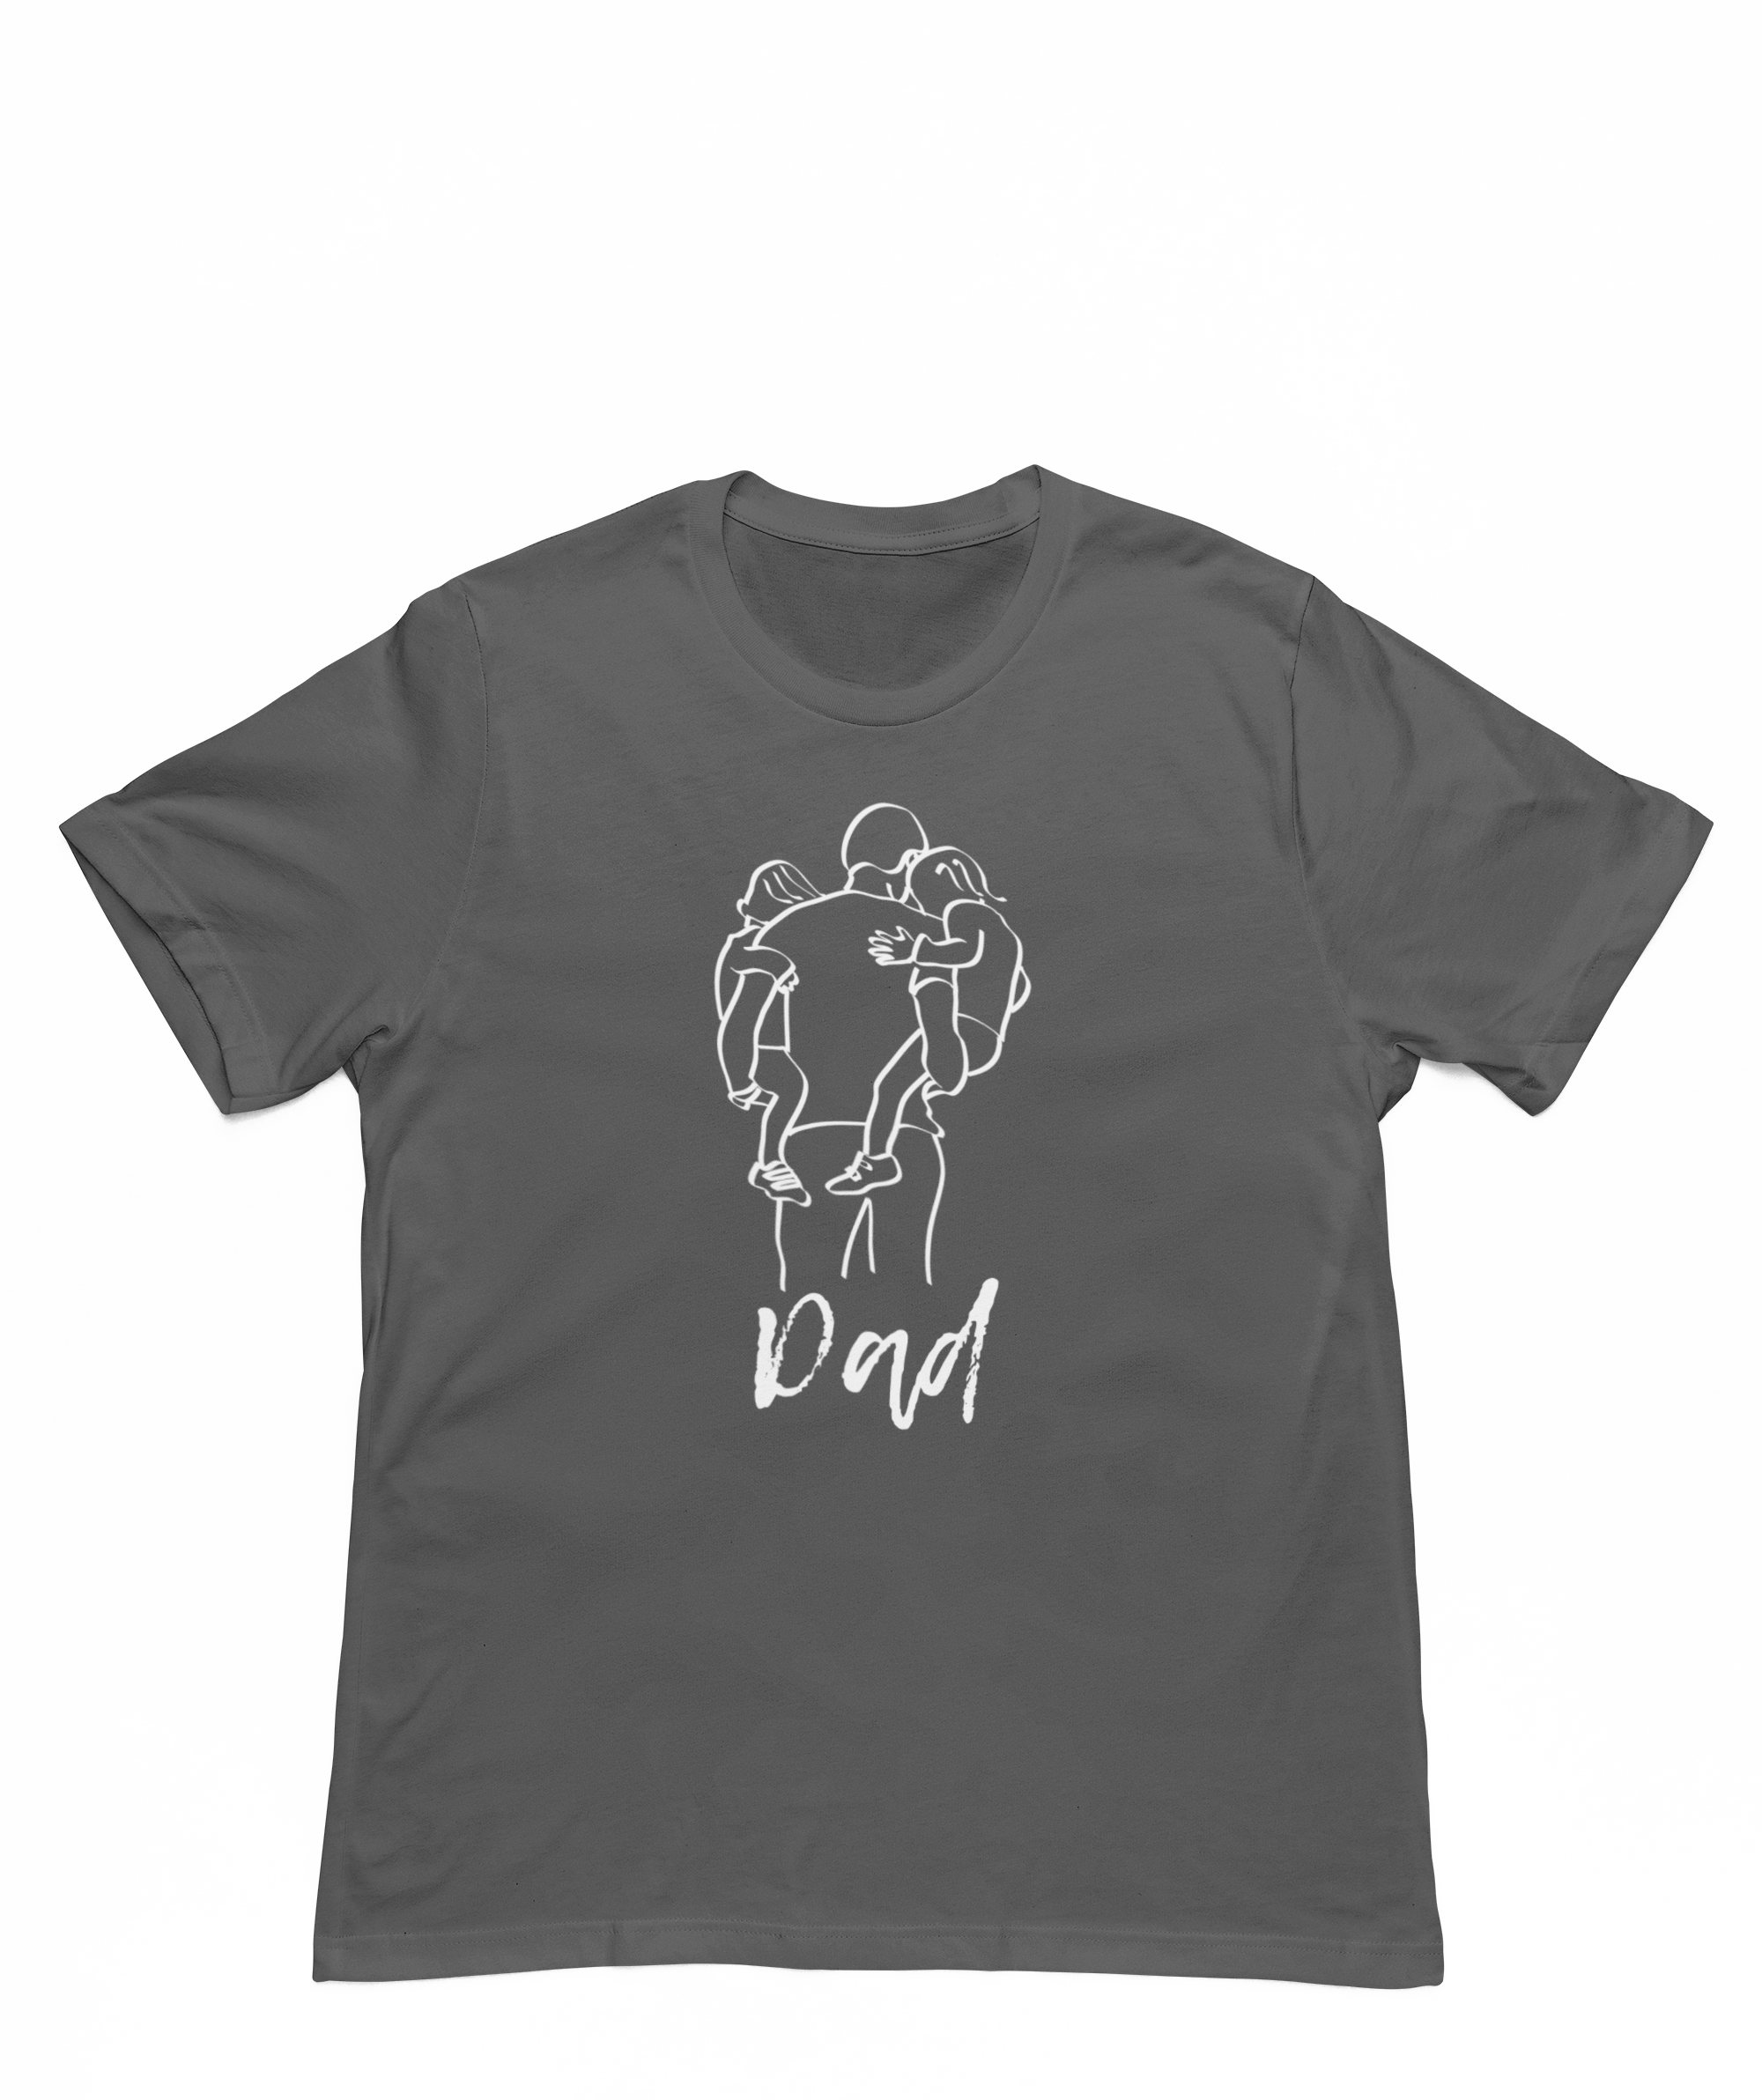 Father figure t-shirt - Father's Day gift